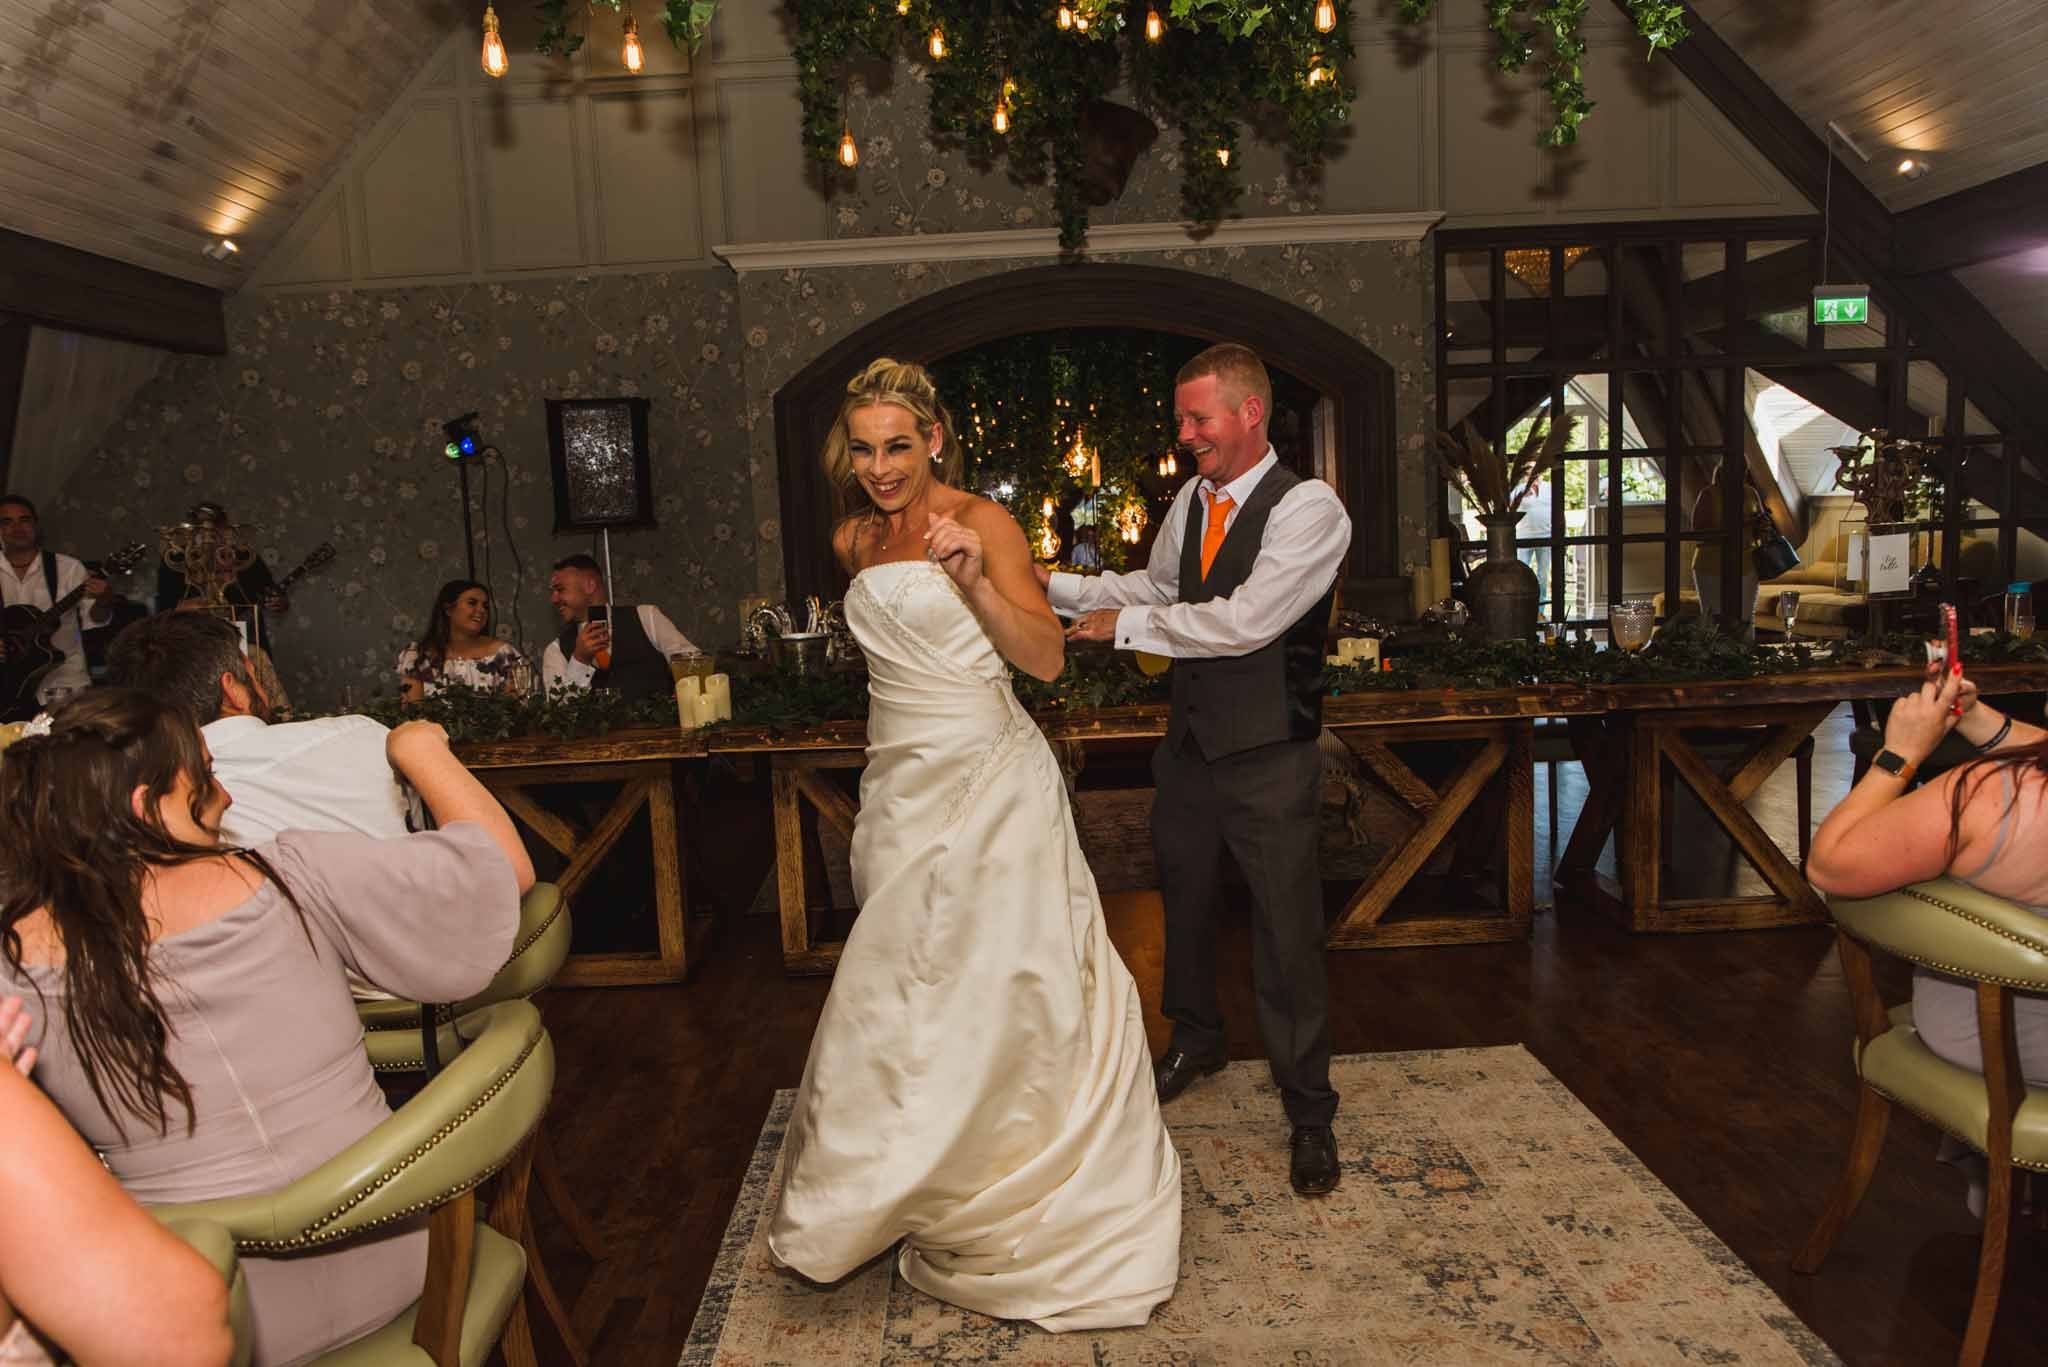  The bride and groom are in the middle of the room for their first dance on the large rug while everyone watches. 